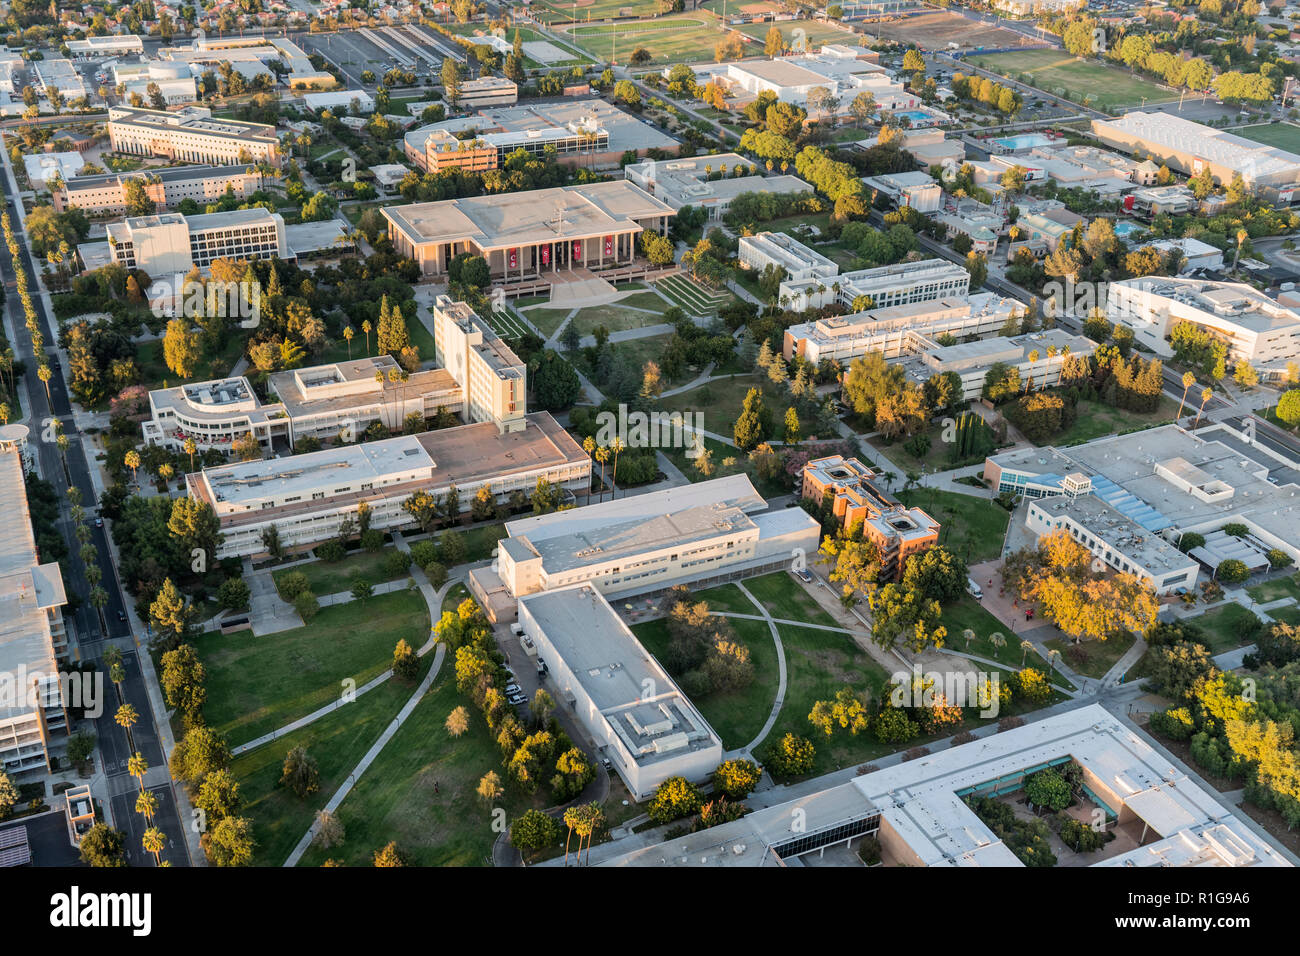 Los Angeles, California, USA - October 21, 2018:  Late afternoon aerial view of California State University Northridge central campus buildings in the Stock Photo